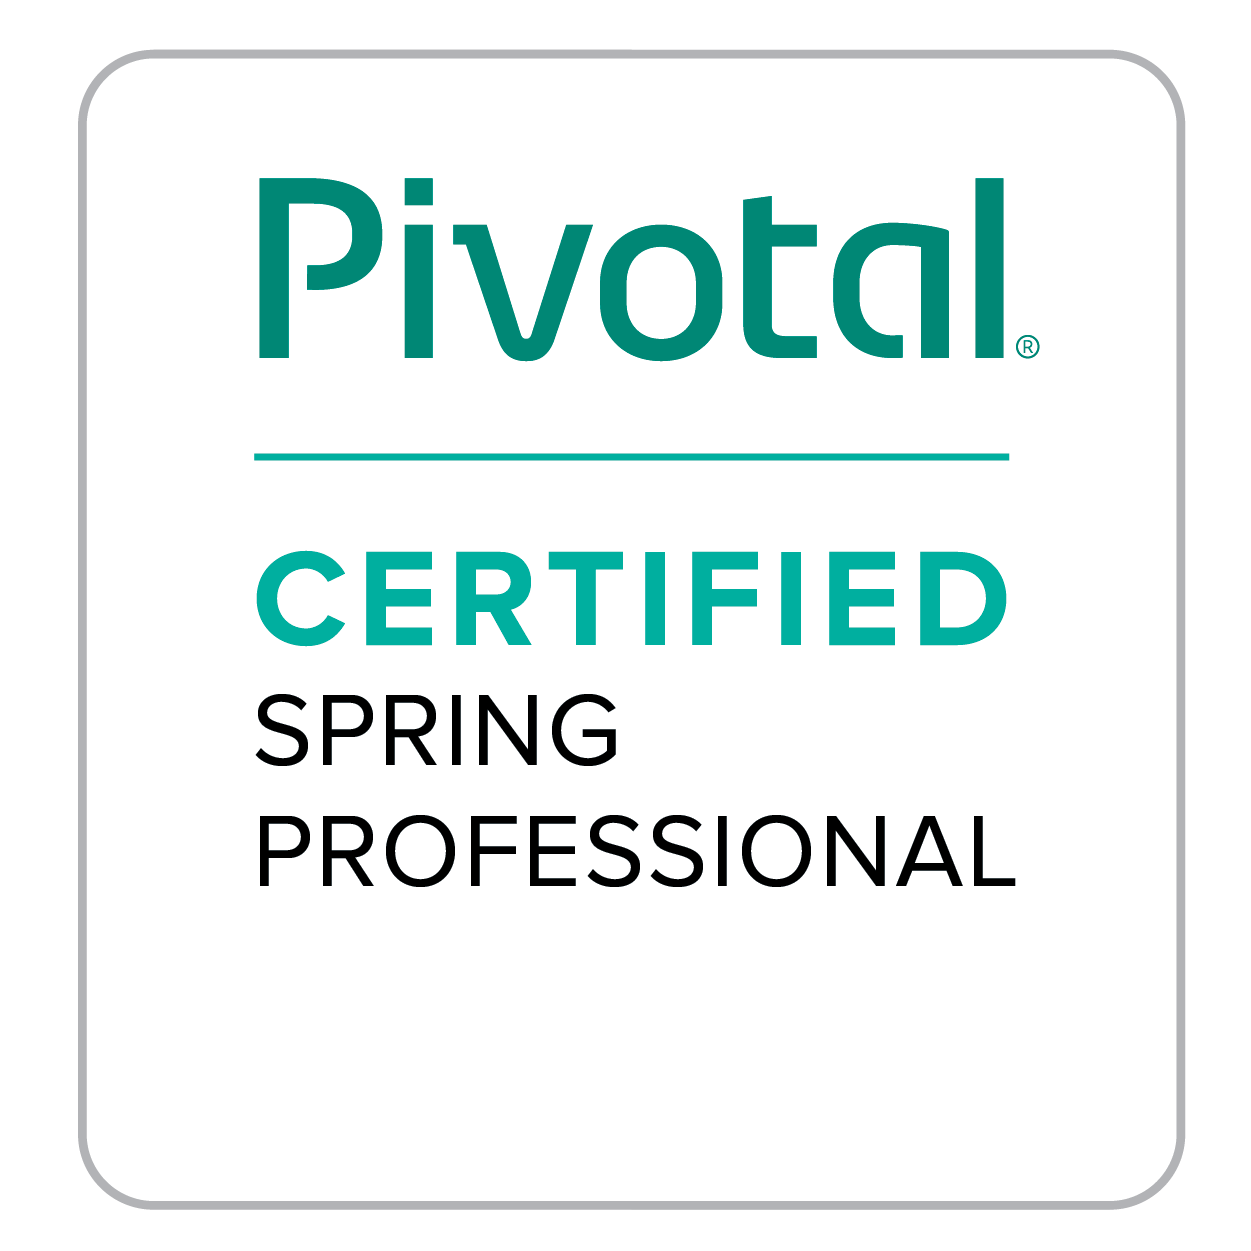 Pivotal Certified Spring Professional